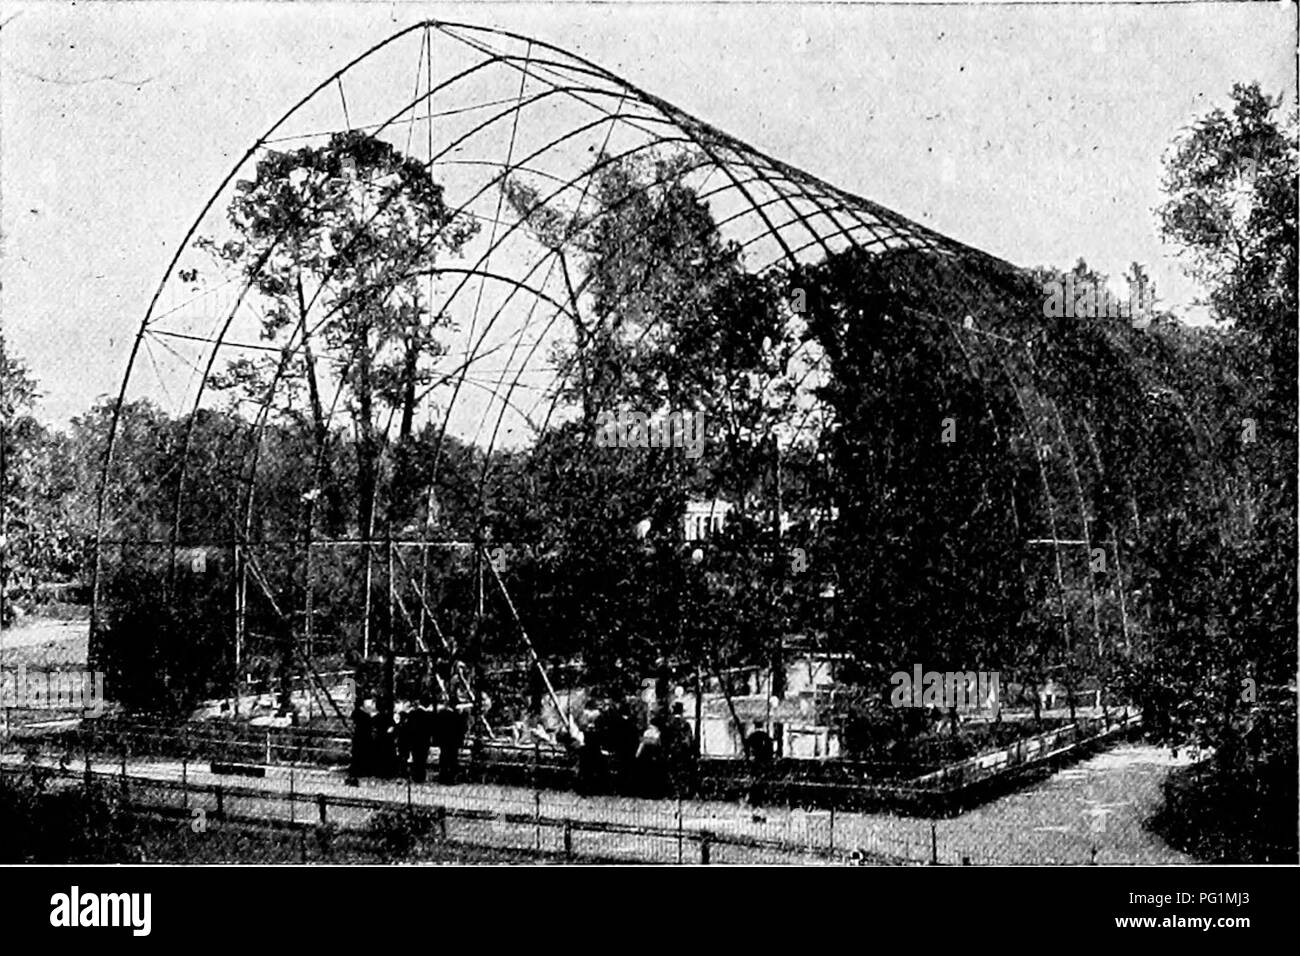 . Popular official guide to the New York Zoological Park. New York Zoological Park. 136 POPULAR OFFICIAL GUIDE.. FLYING CAGE. able size, two hickories aud an oak; and it contains a pool of water a hundred feet long, and shrubbery in abundance. The idea of a very large cage for herons and egrets, is not new, for there are in existence several other flying cages, somewhat smaller than this. The first was ei'ected in the Rotterdam Zoological Garden by its Director, the late Dr. A. Von Bemmelin, whose experiment proved very successful. Others are at London and in Paris Jardin d'Acelimata- tion. Th Stock Photo